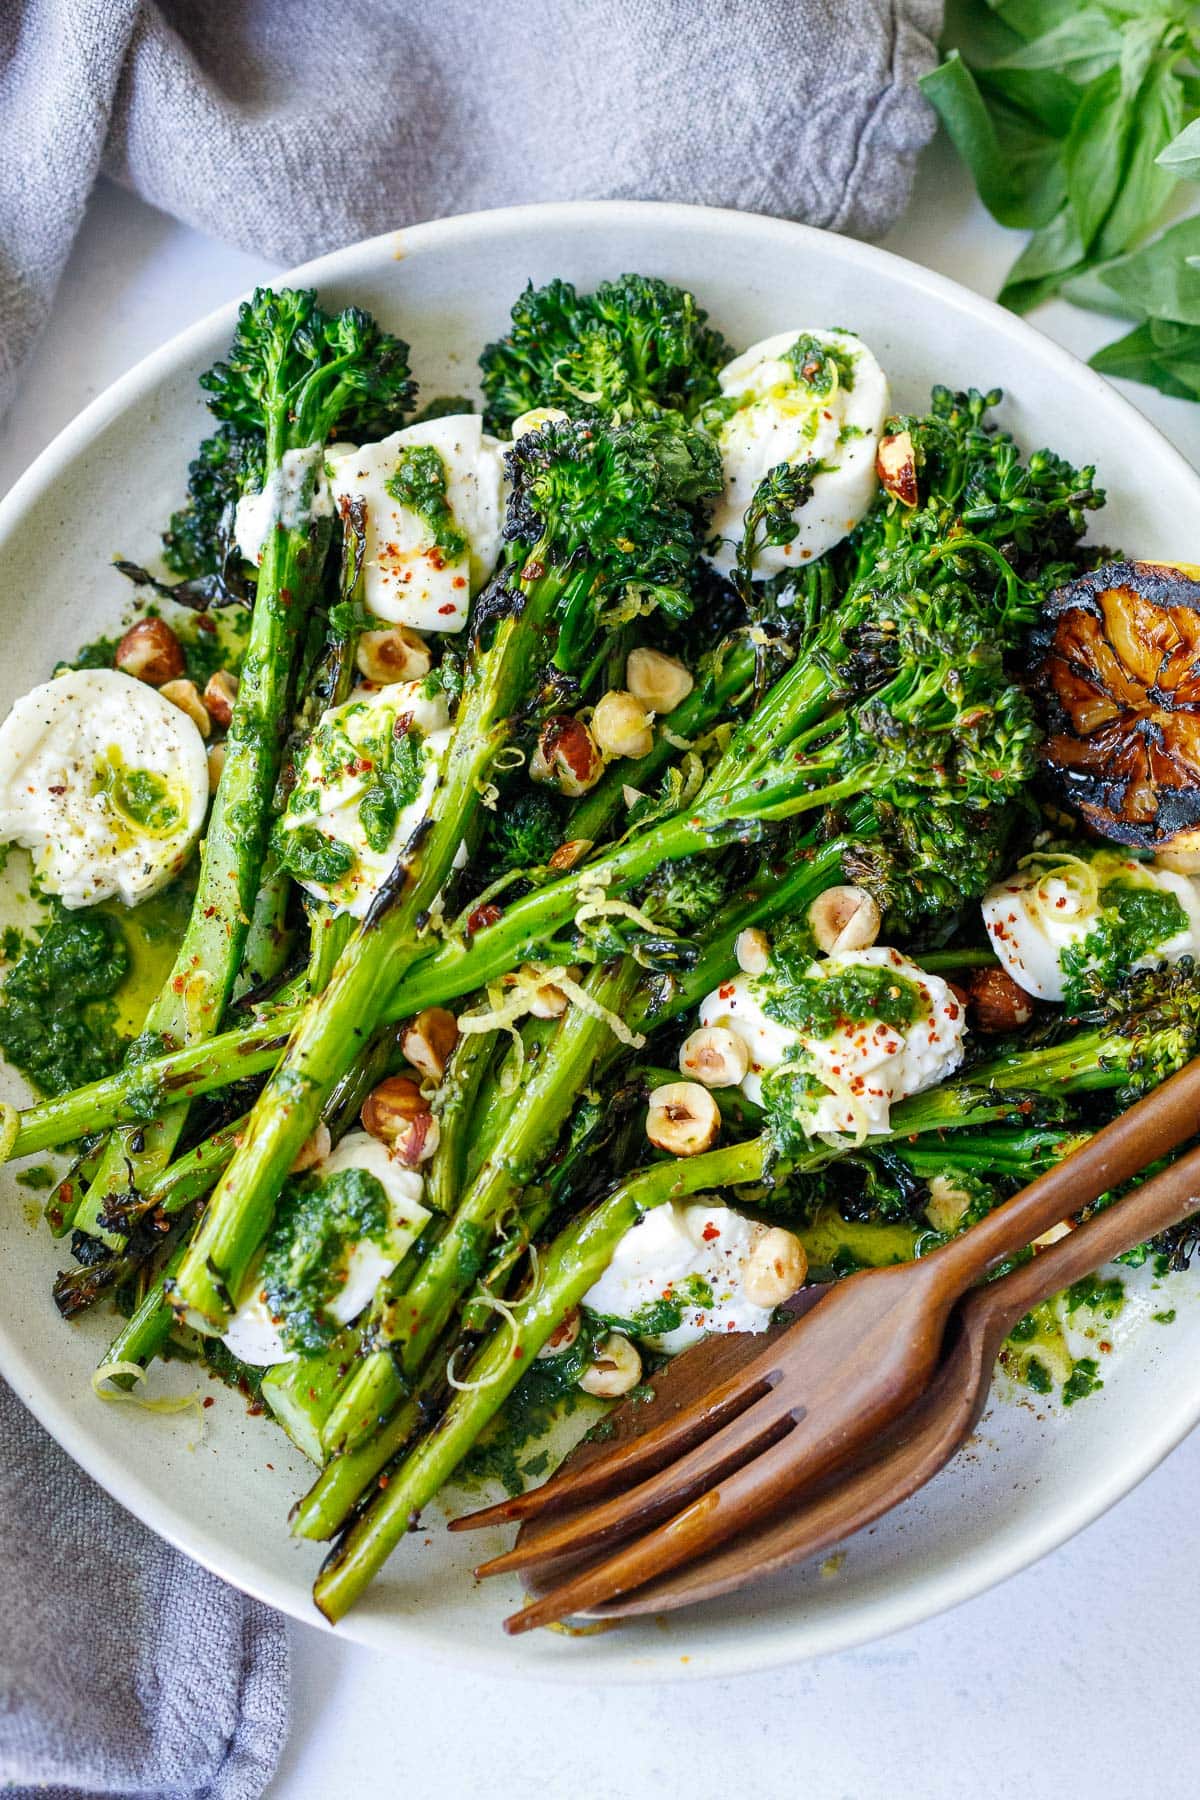 Grilled Broccolini with Burrata, Hazelnuts and Basil oil- a super tasty summer side dish perfect for outdoor dinners and gatherings